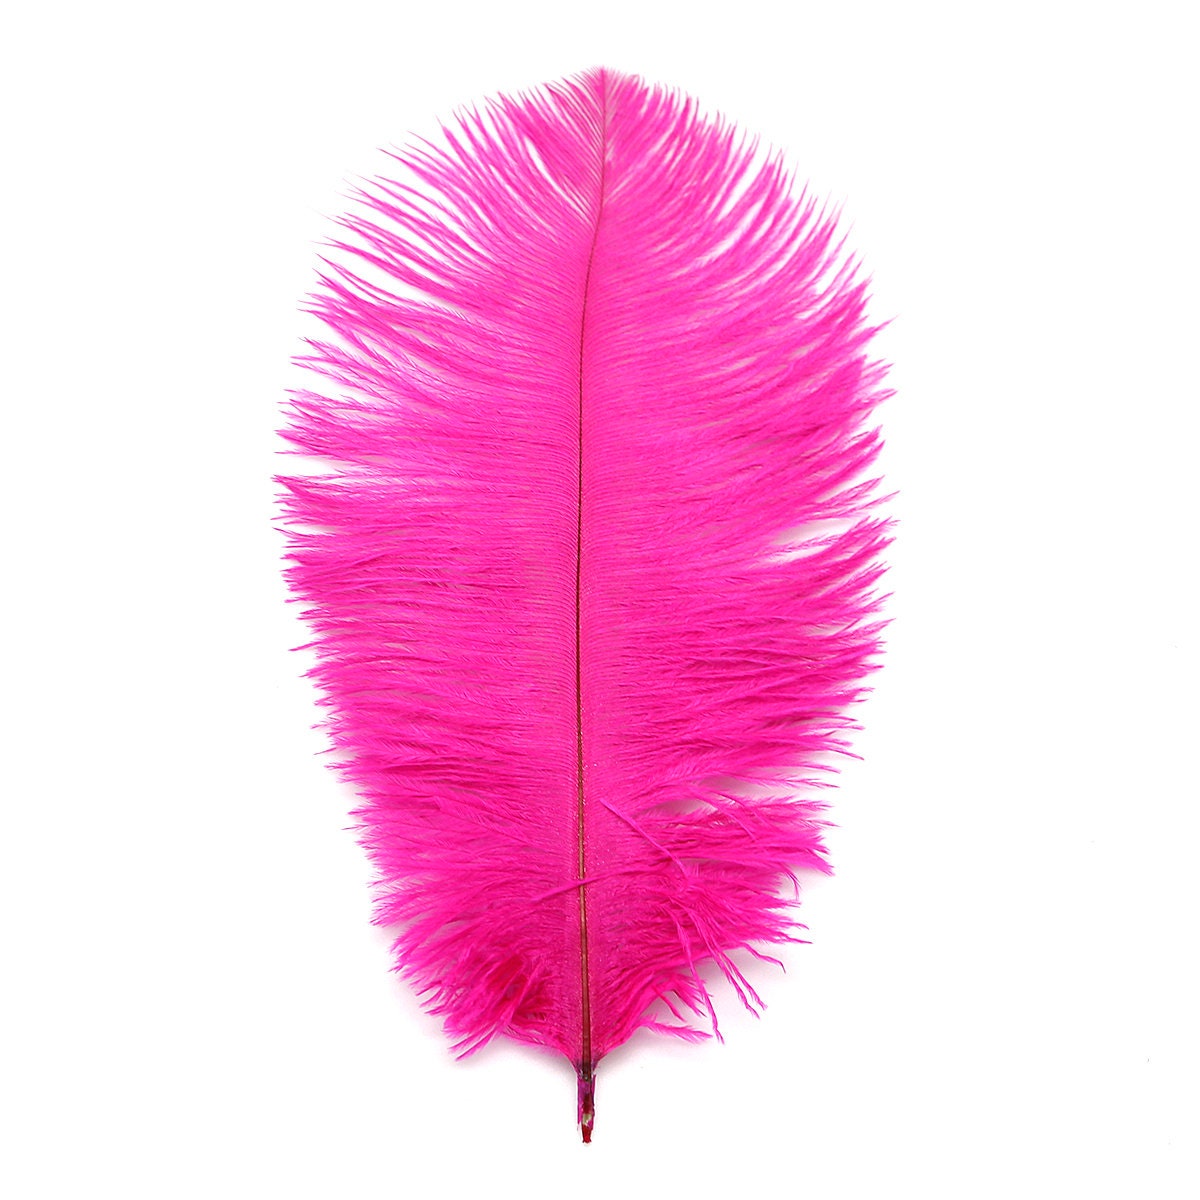 14 Colors of Ostrich Feathers Rainbow Feathers 15-20cm or - Etsy